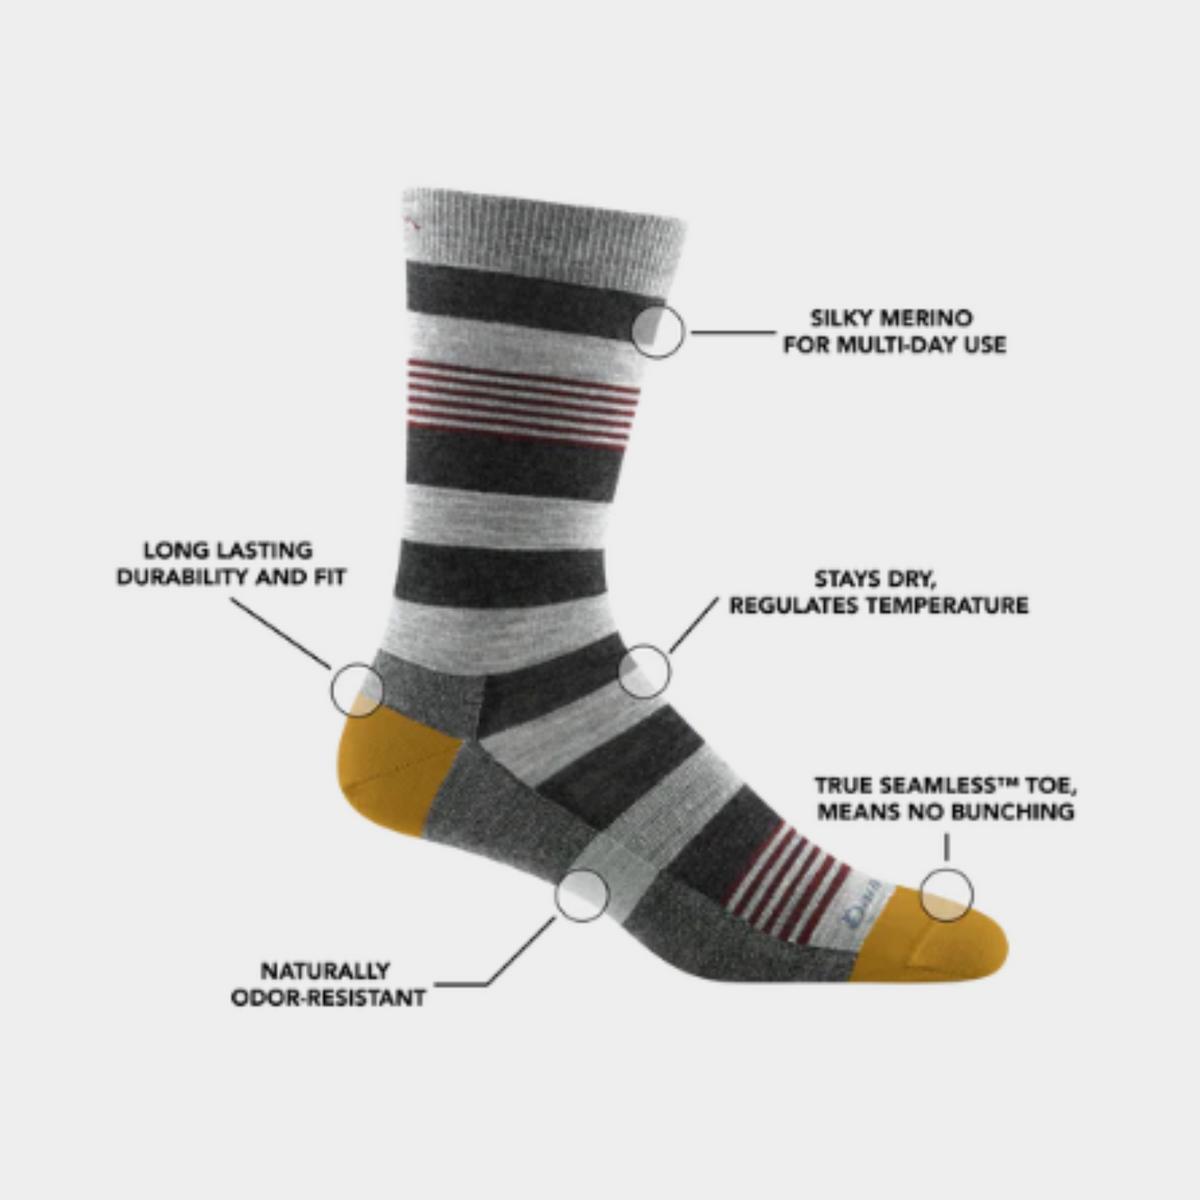 Darn Tough 6033 Oxford Crew Lightweight men&#39;s sock in gray and black stripes highlighting the features of the sock